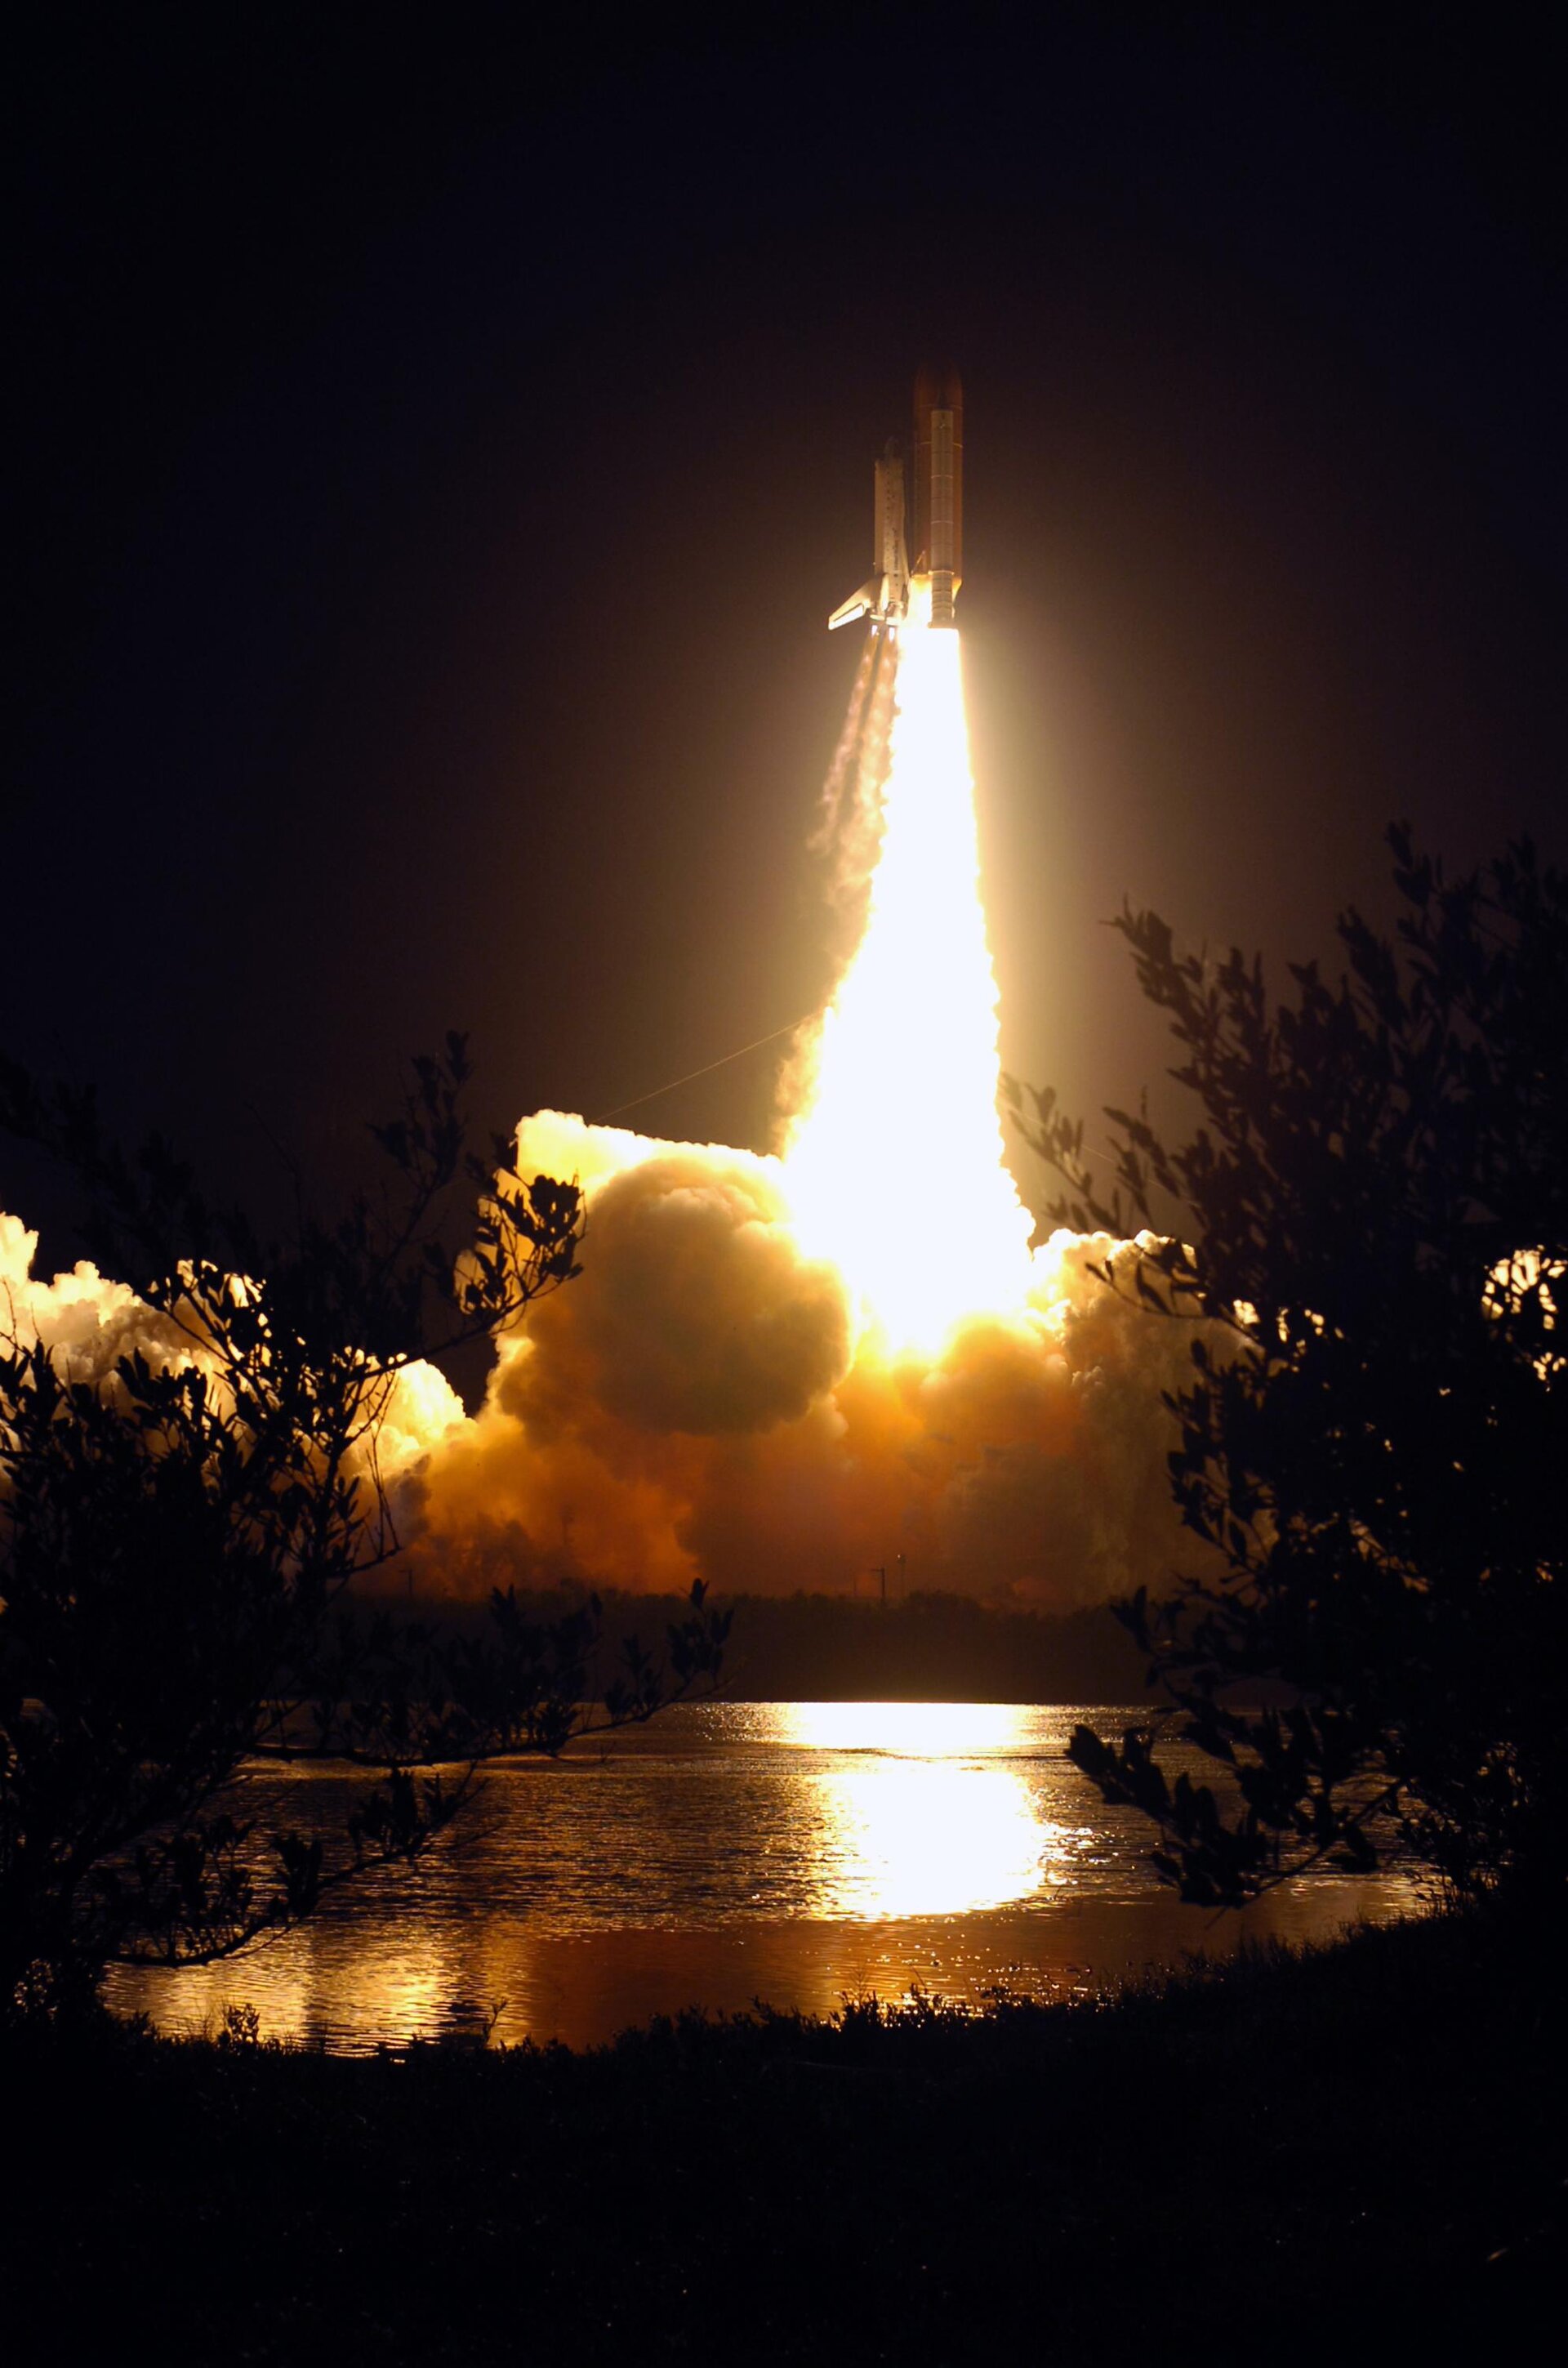 Discovery launched from Kennedy Space Center, in Florida, at 02:47 CET (01:47 UT) on 10 December 2006